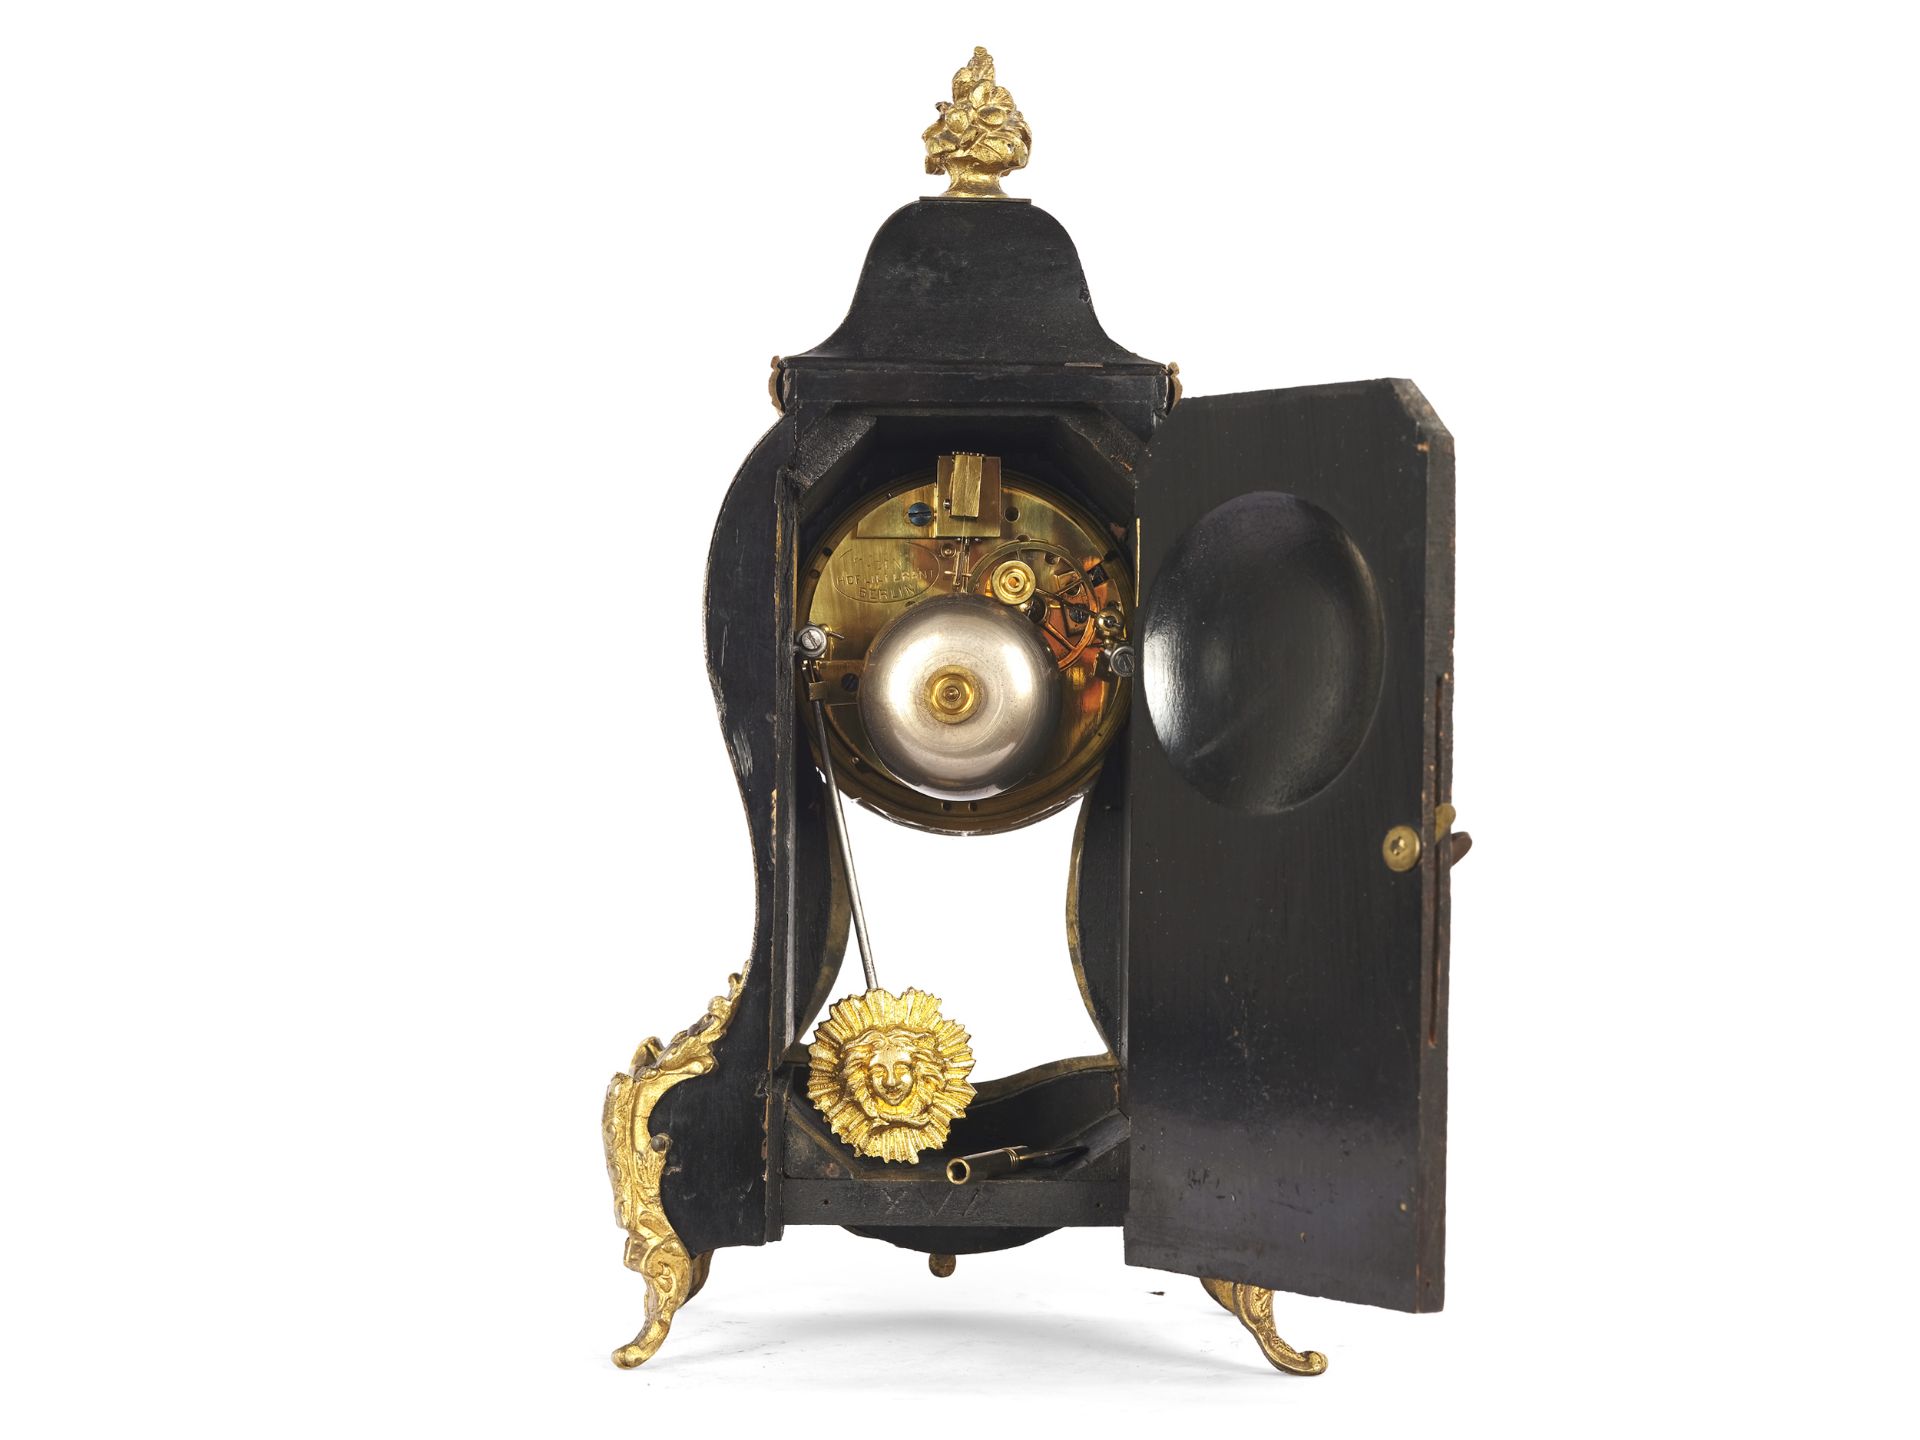 Commode clock, in the style of André-Charles Boulle - Image 4 of 5